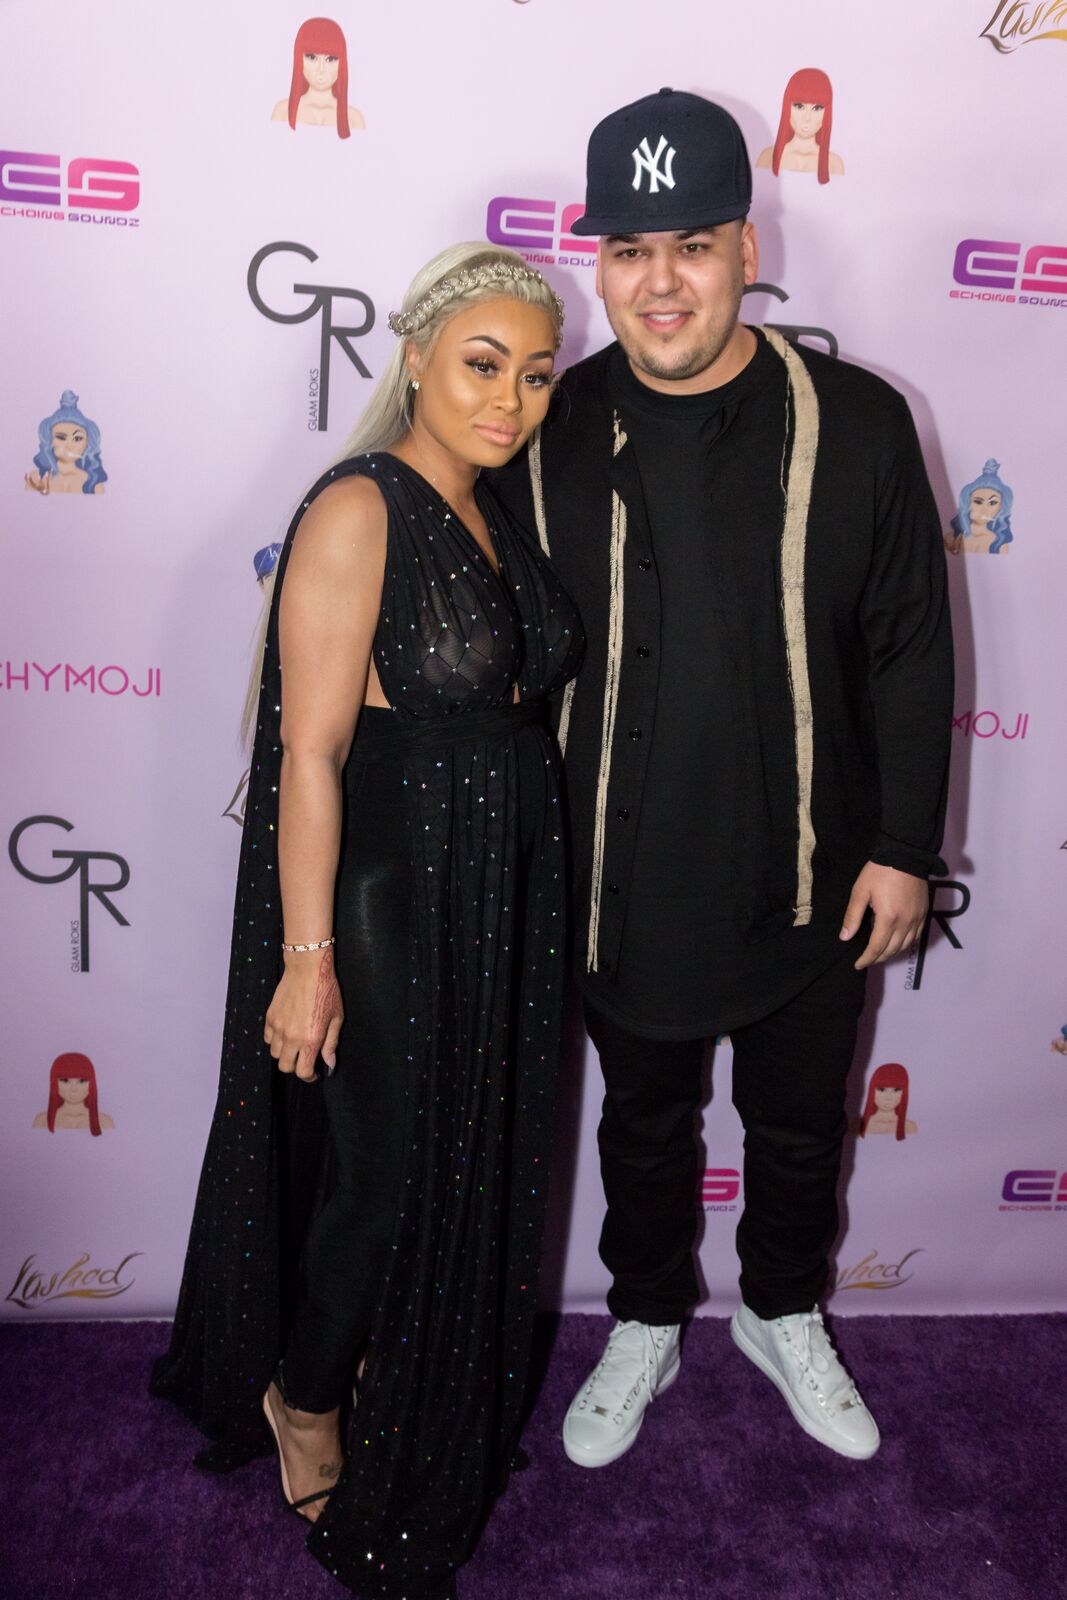 Rob Kardashian and Blac Chyna arrive at her Blac Chyna Birthday Celebration And Unveiling Of Her "Chymoji" Emoji Collection at the Hard Rock Cafe on May 10, 2016 | Photo: Getty Images